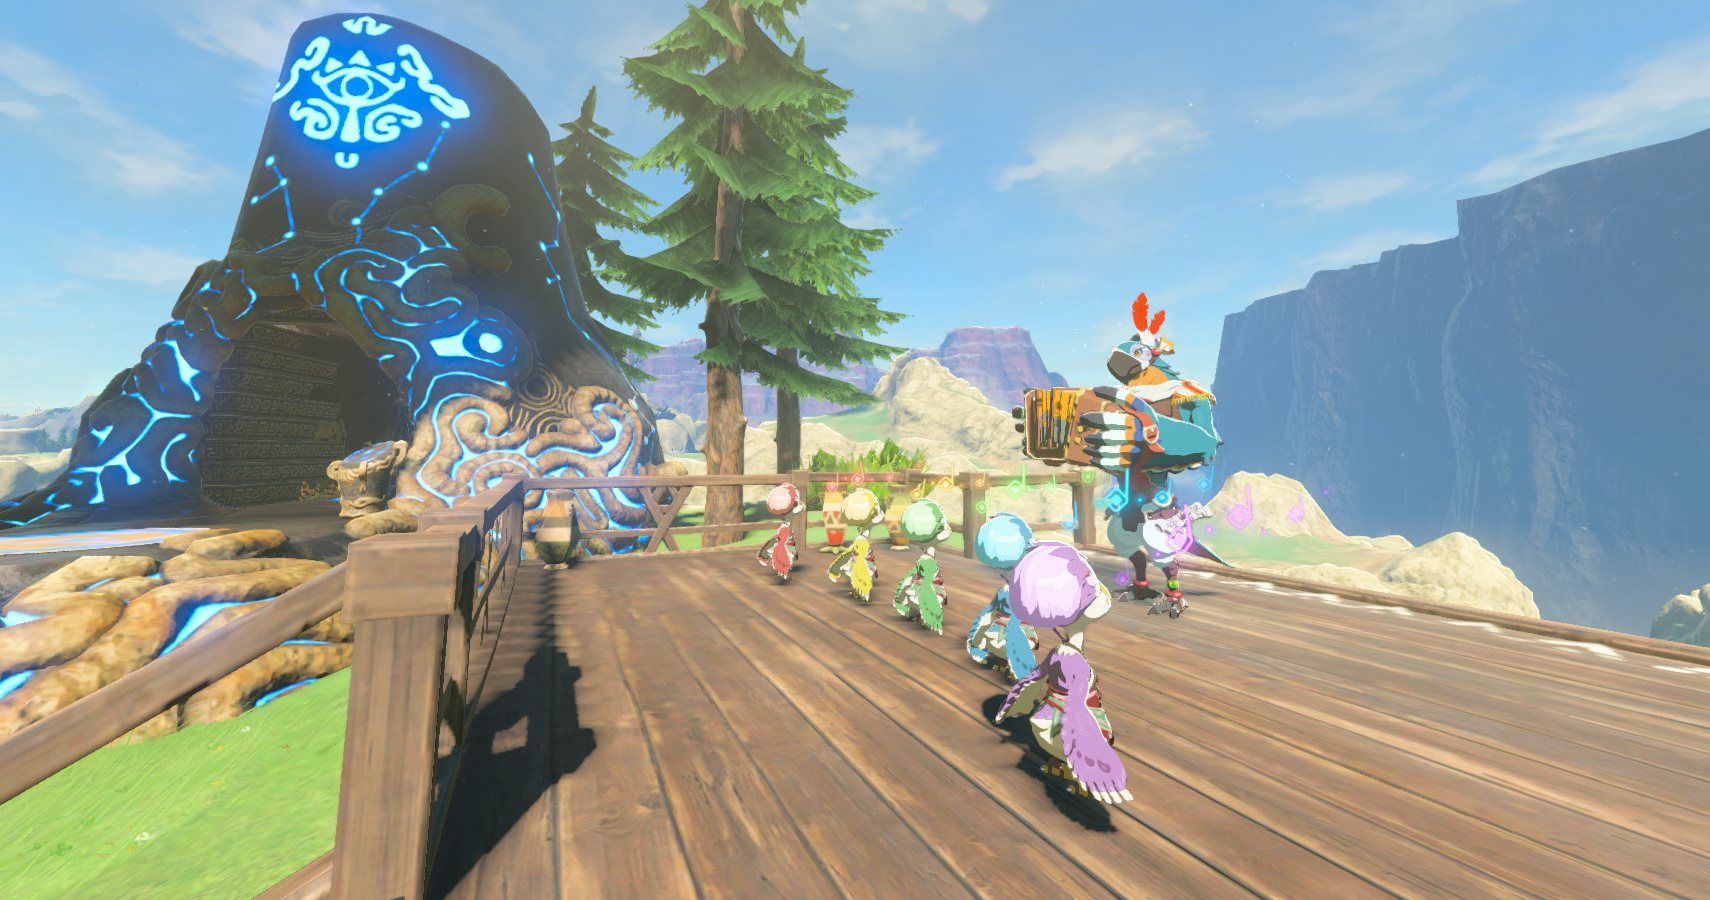 A First-Person Mod Is Now Available For The Legend Of Zelda: Breath Of The Wild